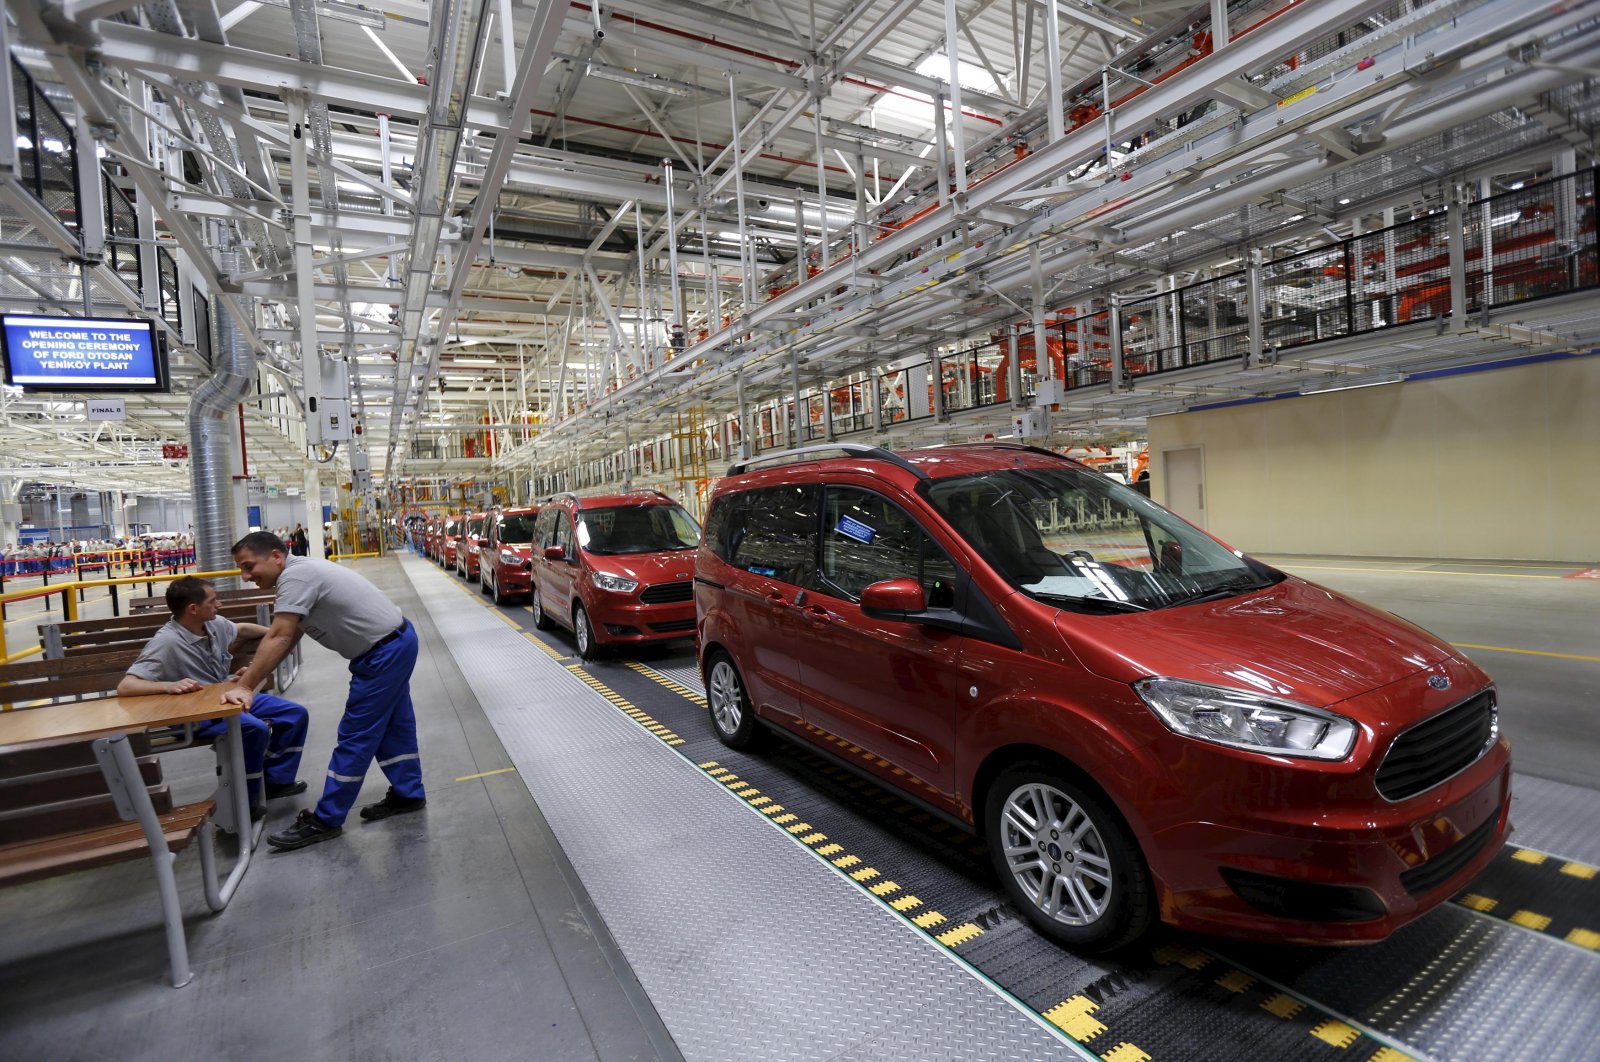 Ford Tourneo Courier light commercial vehicles are pictured at the Ford Otosan Yenikoy car plant in Kocaeli, Turkey, May 22, 2014. (Reuters Photo)